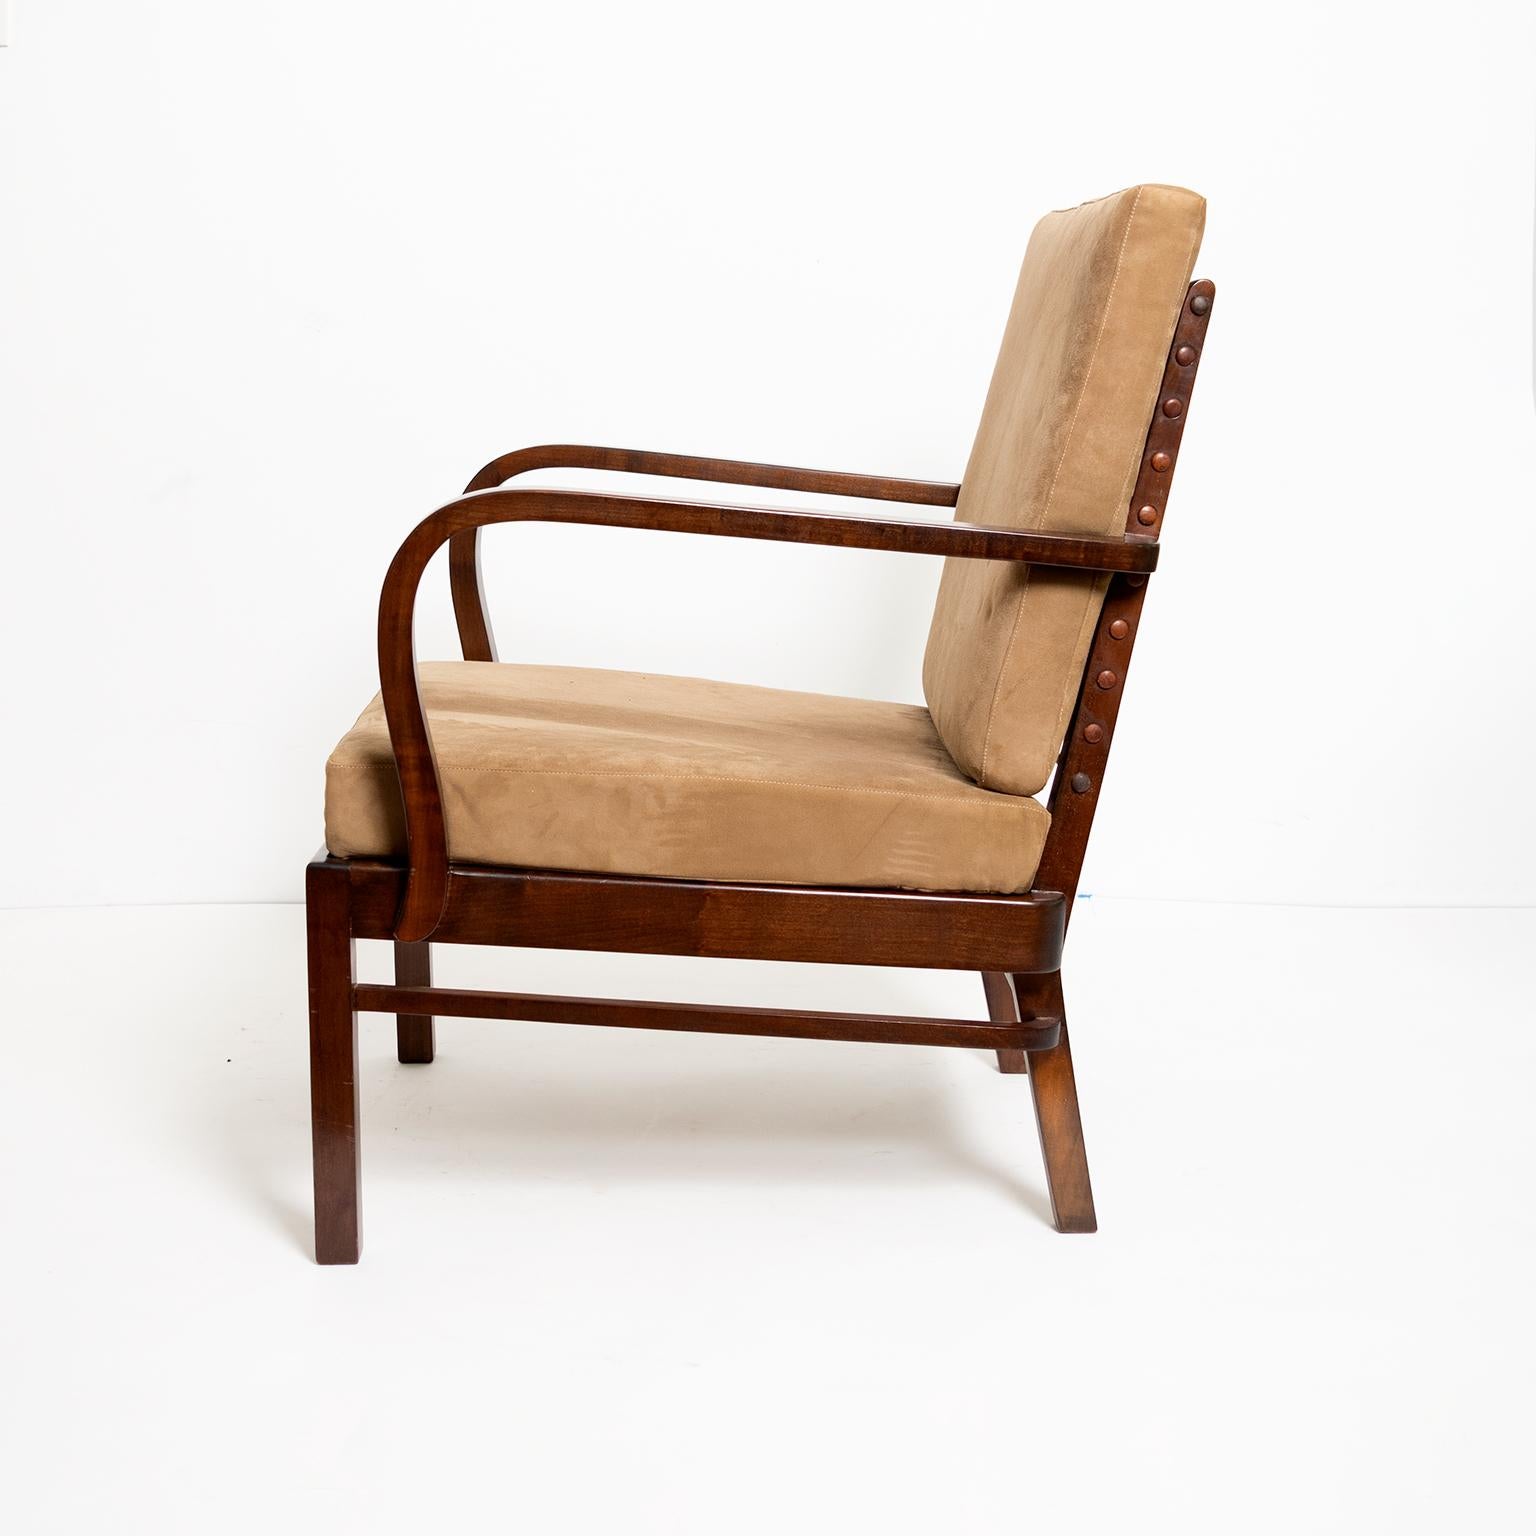 German Modernist 1920s Lounge Chair Designed by Wilhelm Knoll for Knoll Antimott